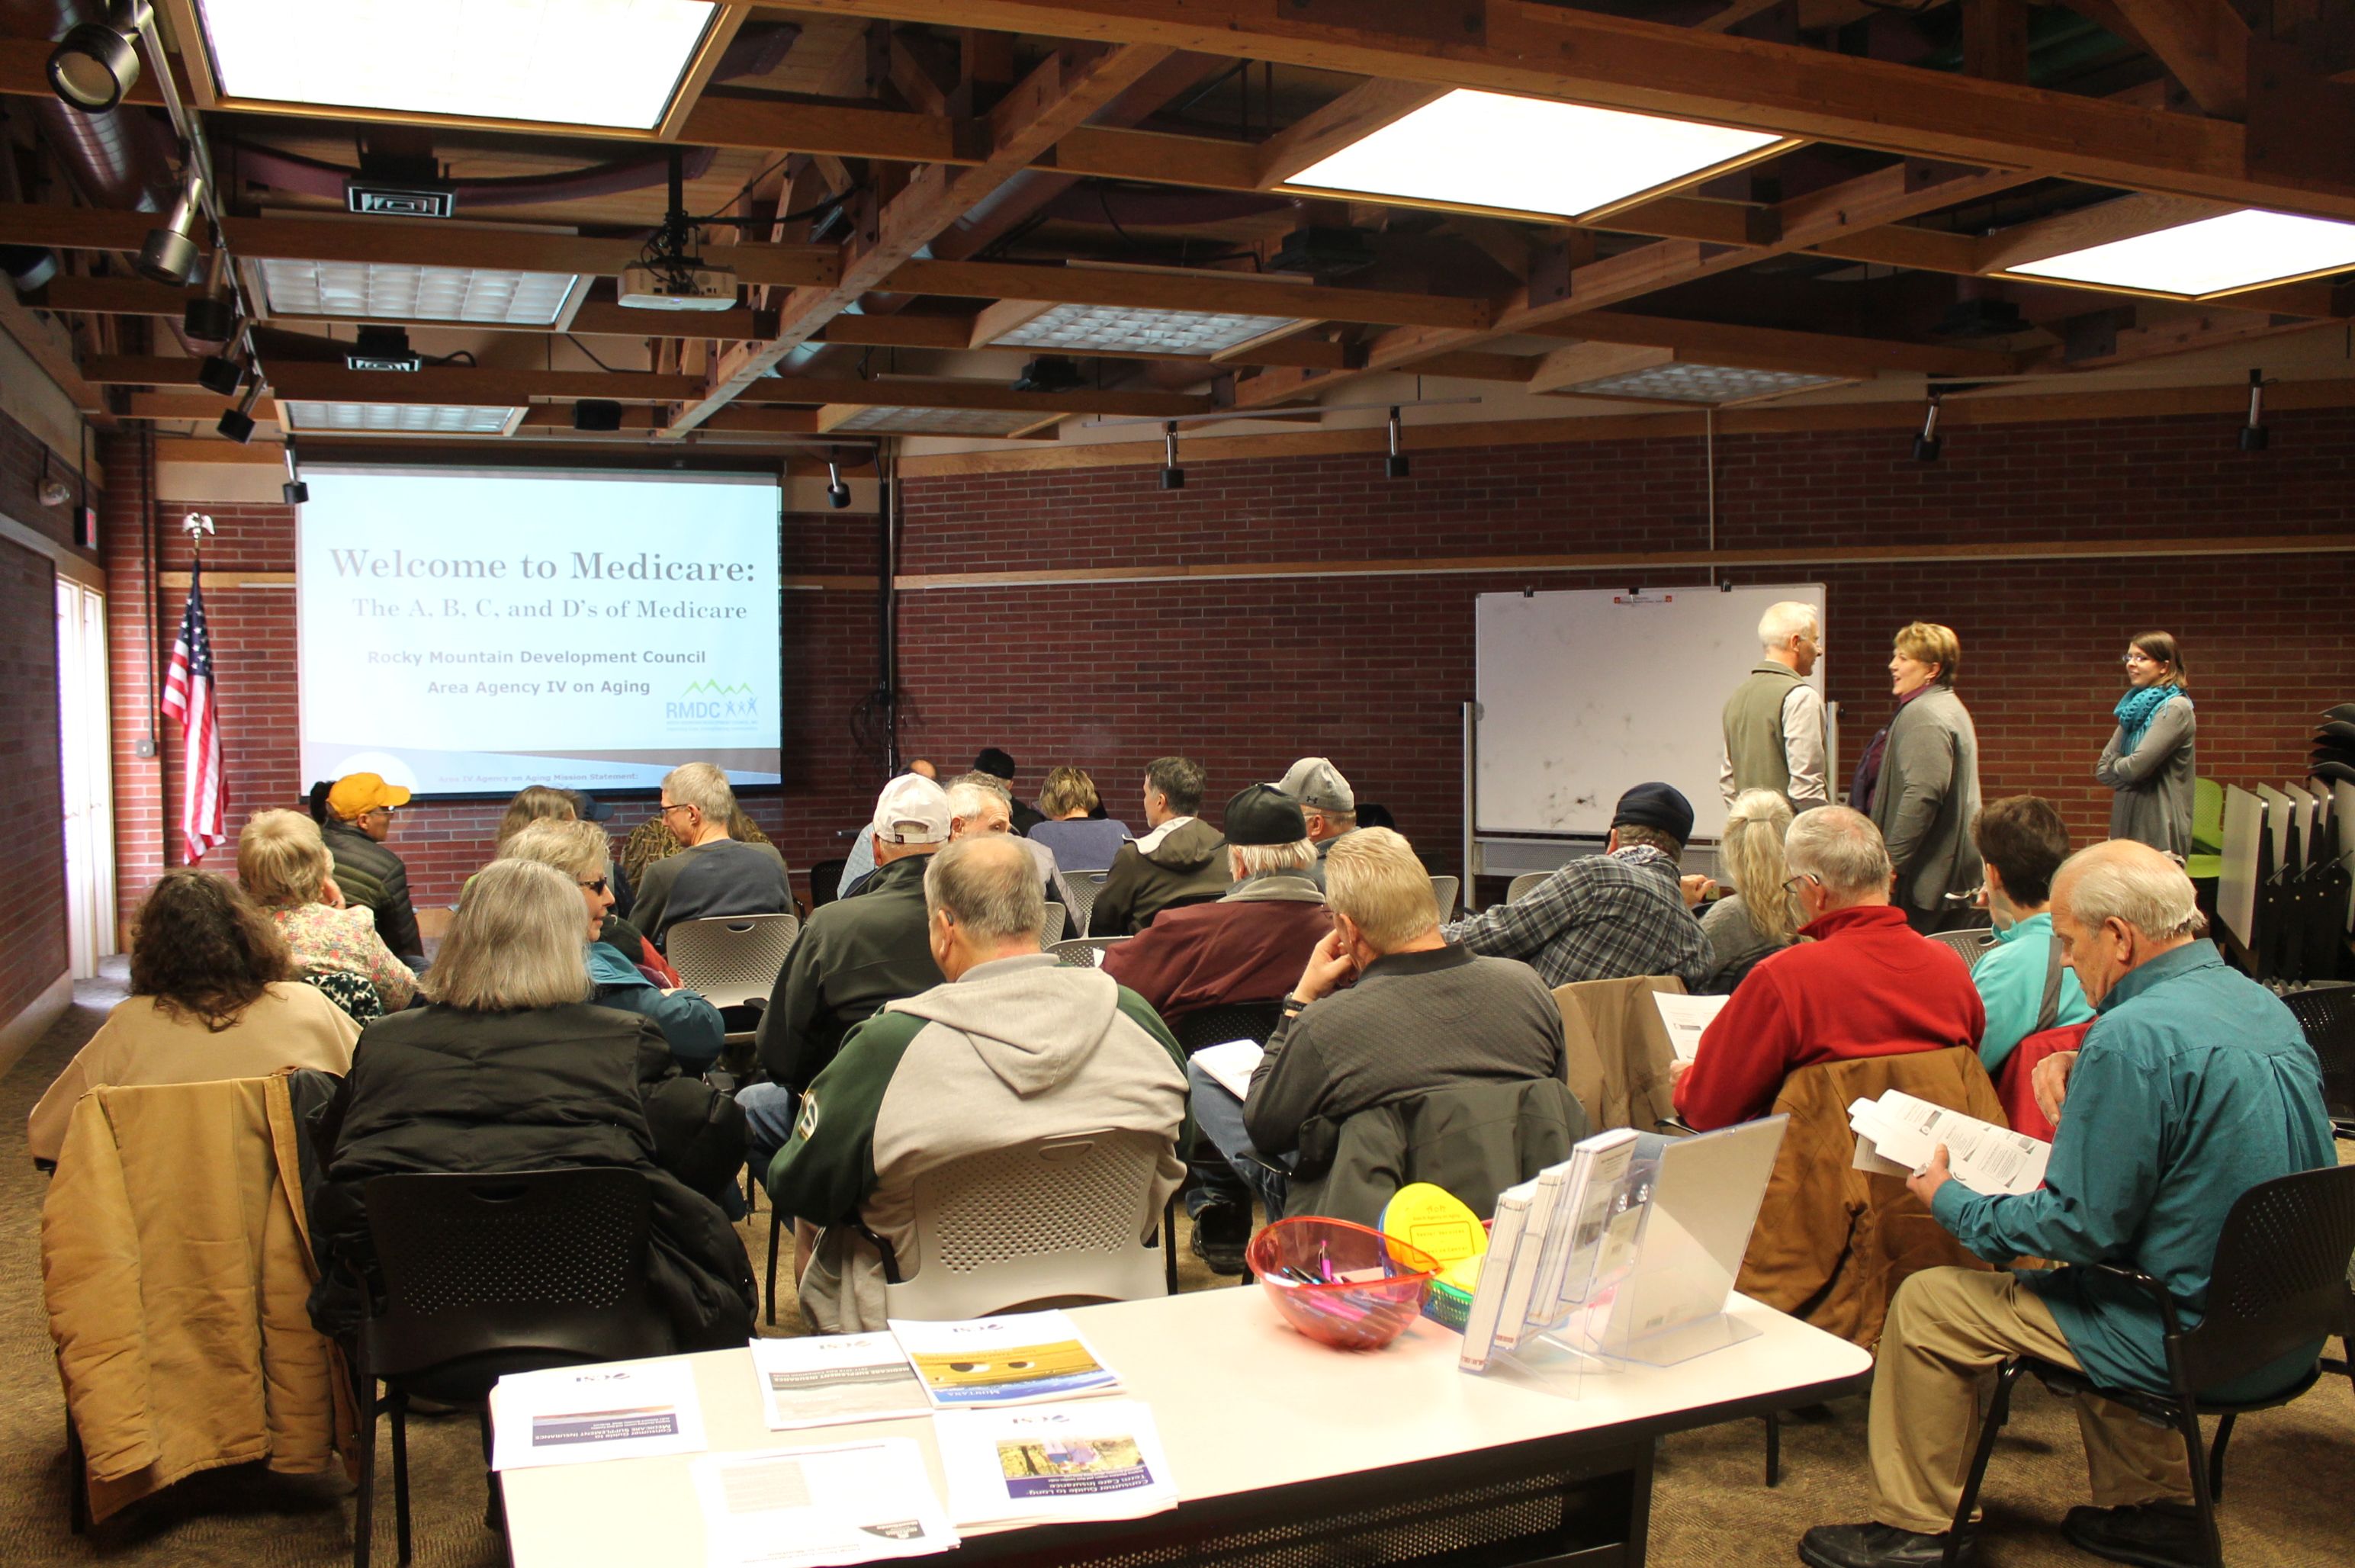 Pictured: A classroom styled Welcome to Medicare session hosted at the Lewis & Clark Library in Helena, MT.